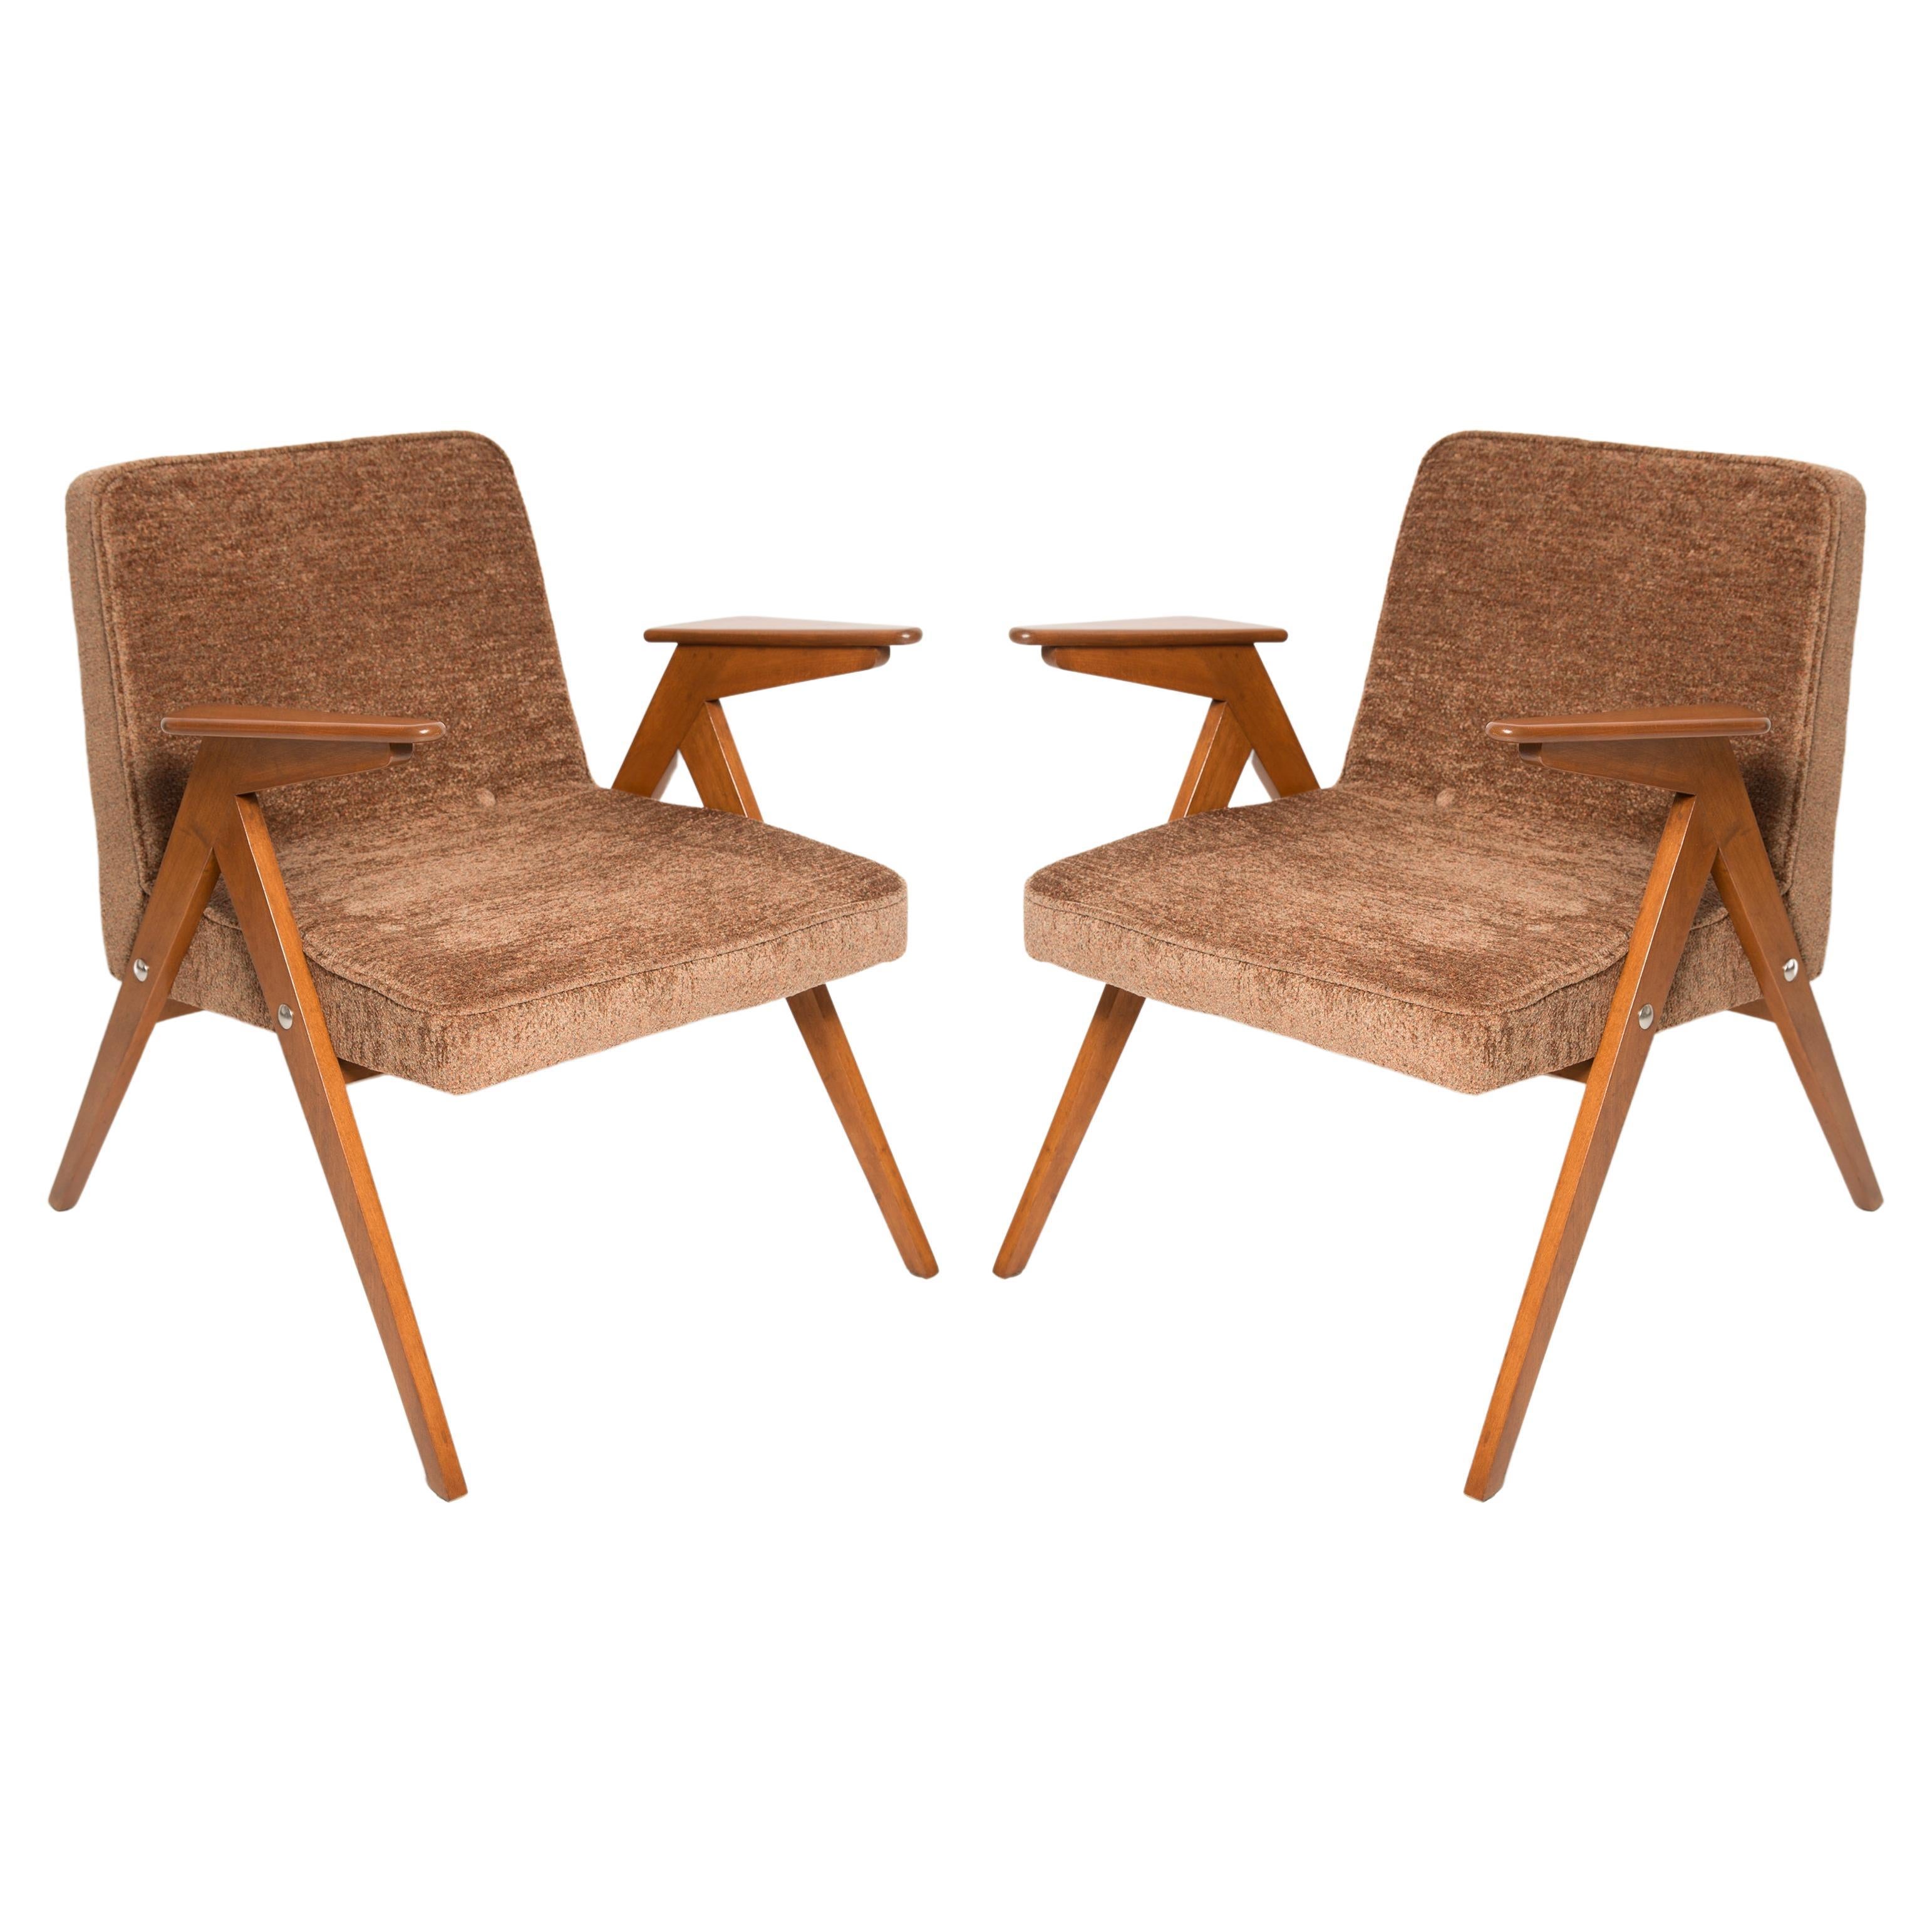 Set of Two Midcentury Brown Bunny Armchairs, by Jozef Chierowski, Poland, 1960s For Sale